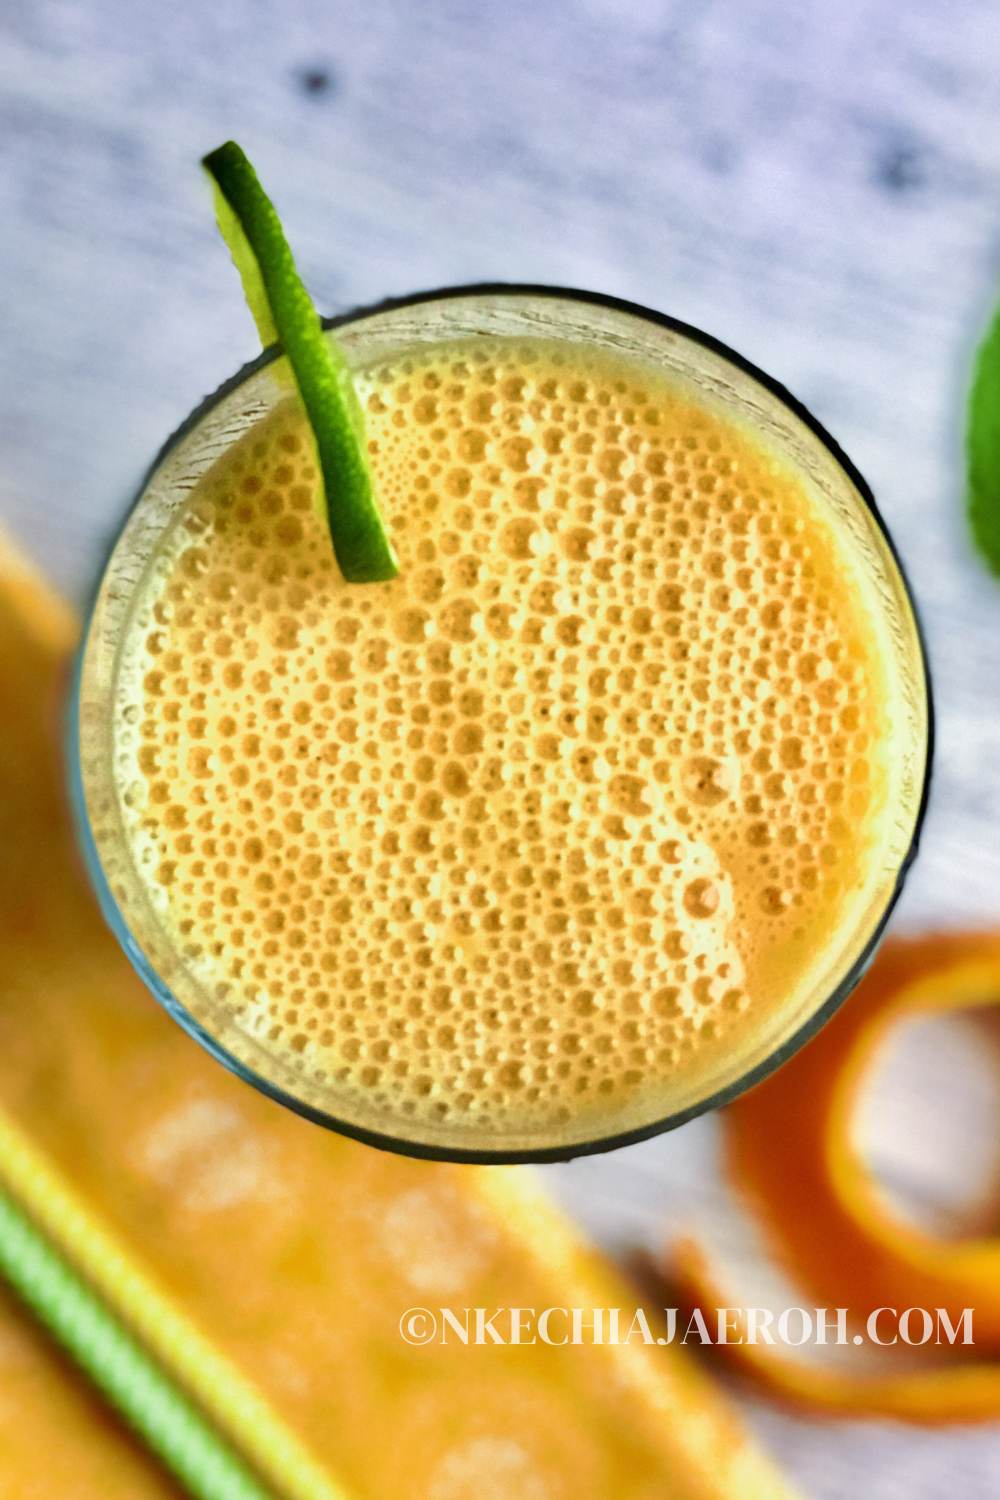 Are you looking for a way to increase your daily vitamin C intake as you quench your summer thirst? I got you! This simple and easy immune-boosting citrus smoothie, also known as Vitamin C smoothie, is equal to the task. With its high vitamin C content, citrus is essential for preventing infections and reinfection. Your immune system can benefit from consuming vitamin C